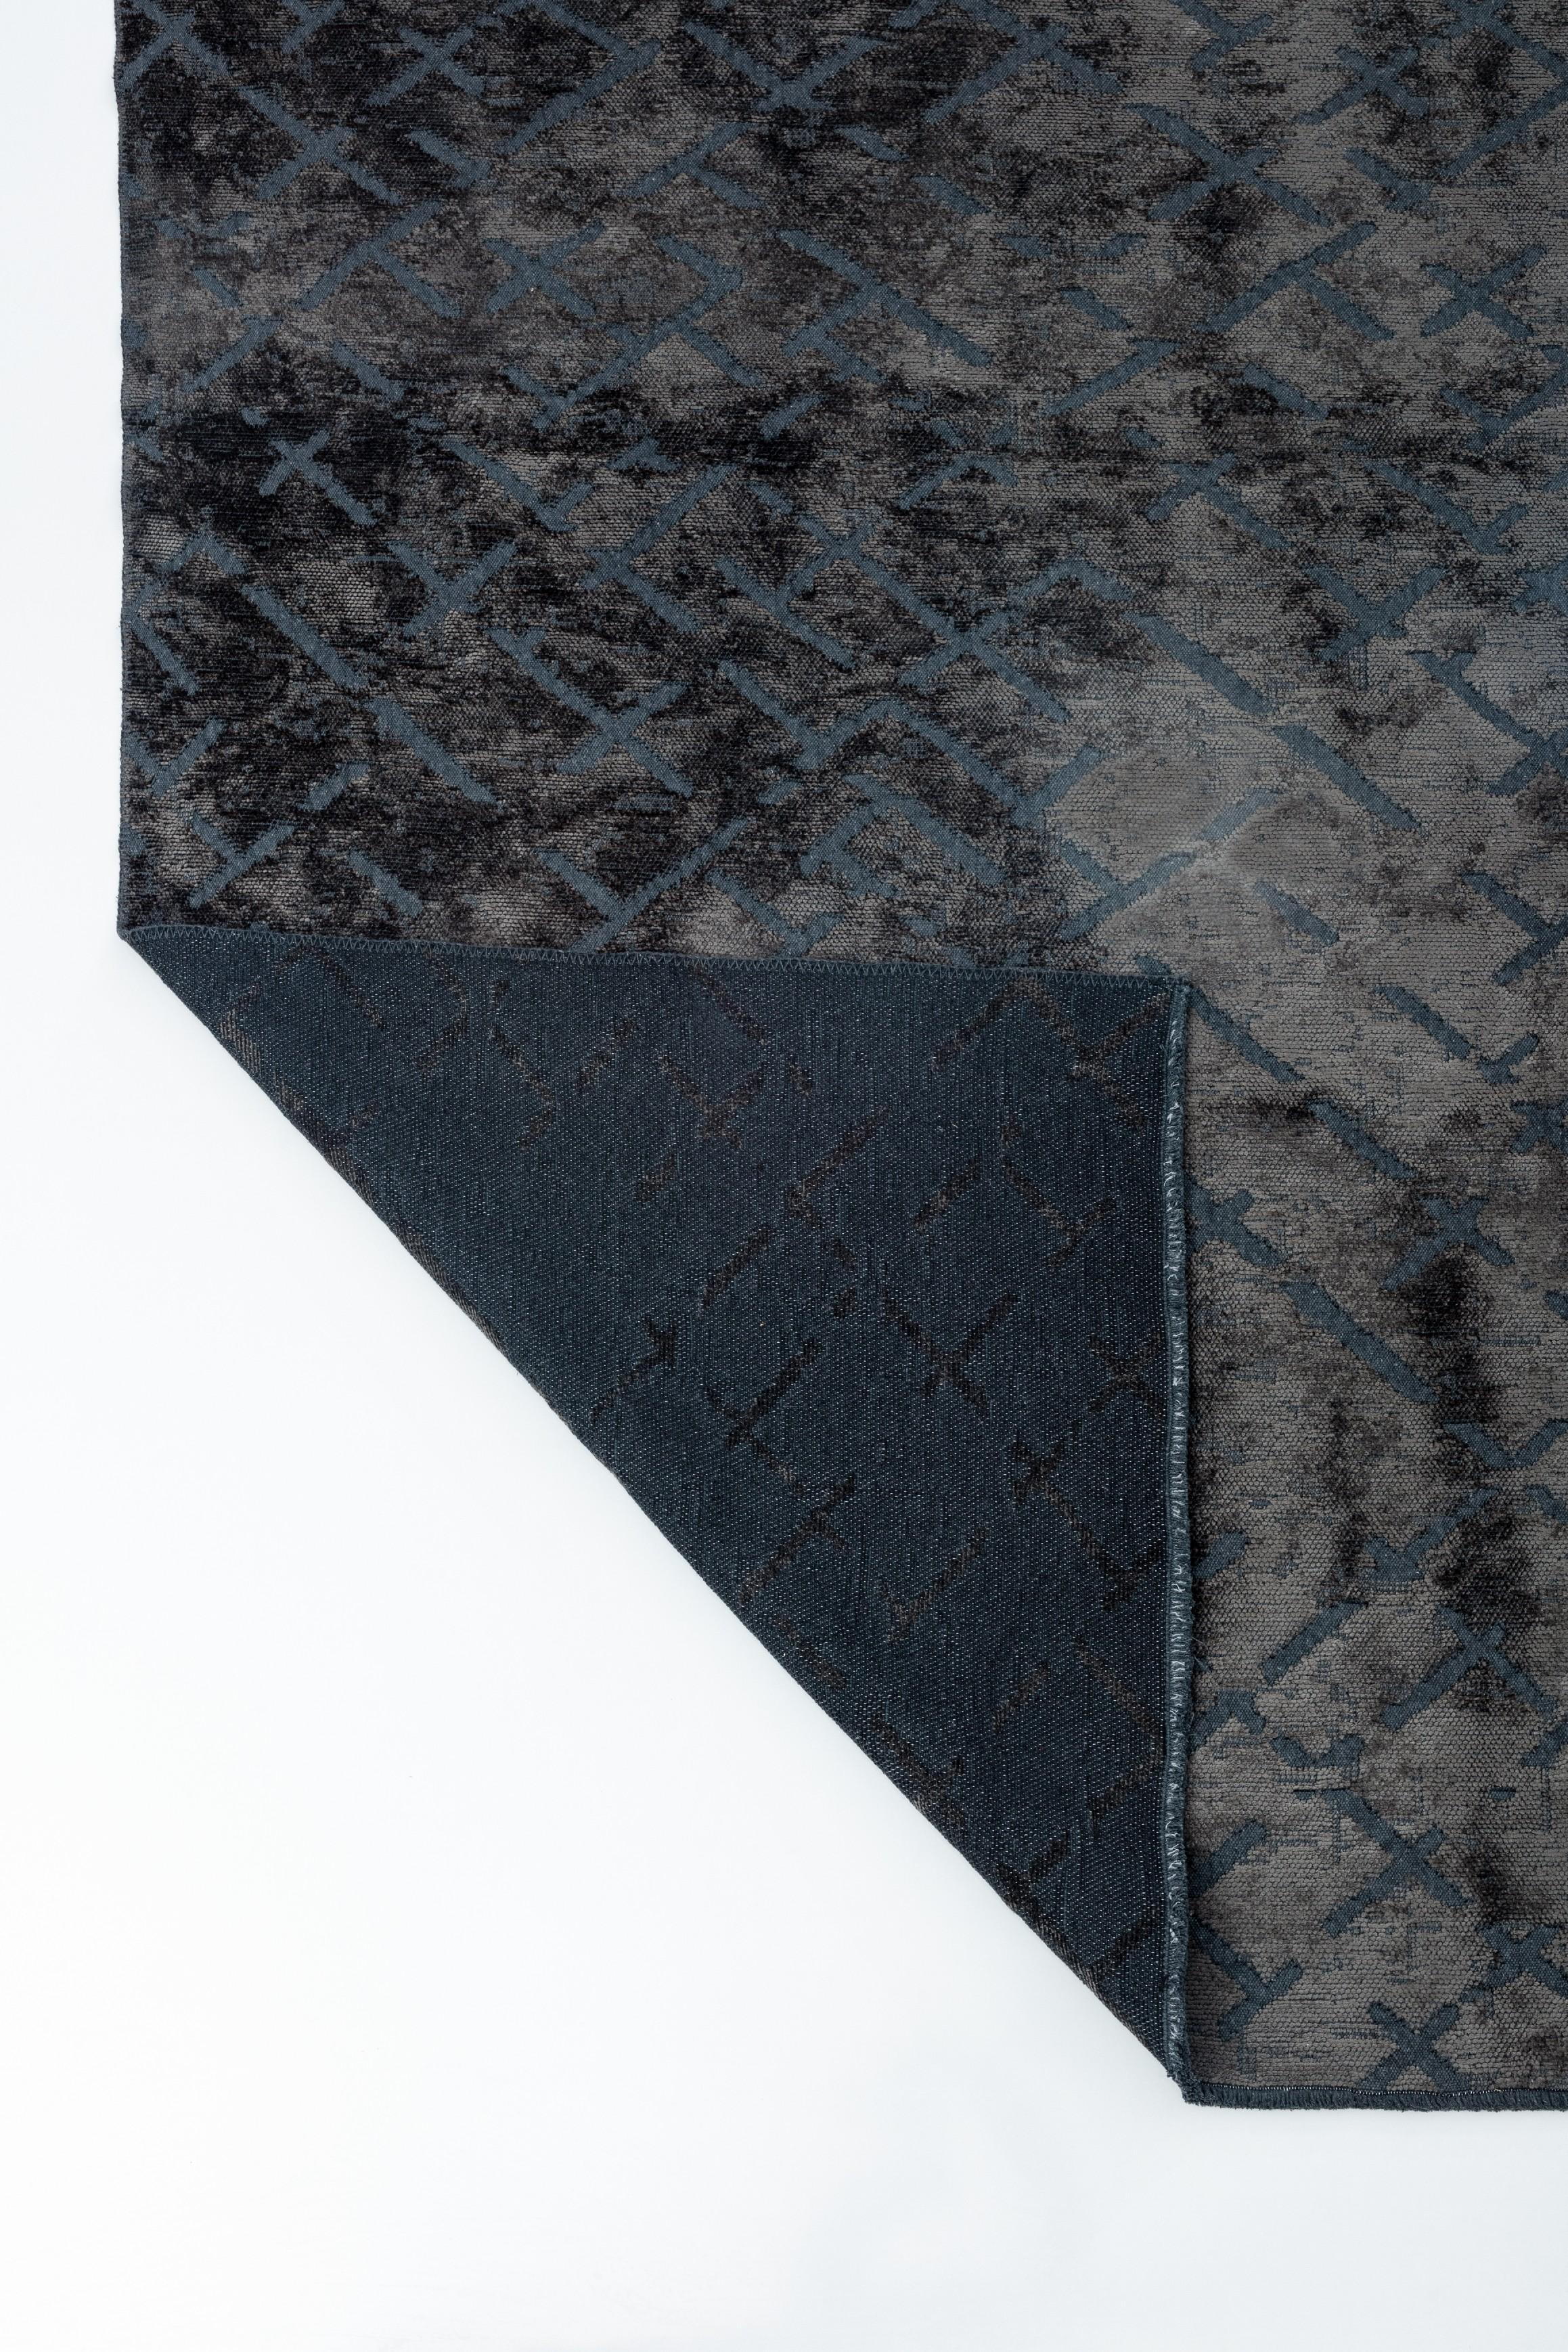 For Sale:  (Gray) Modern  Abstract Luxury Hand-Finished Area Rug 3